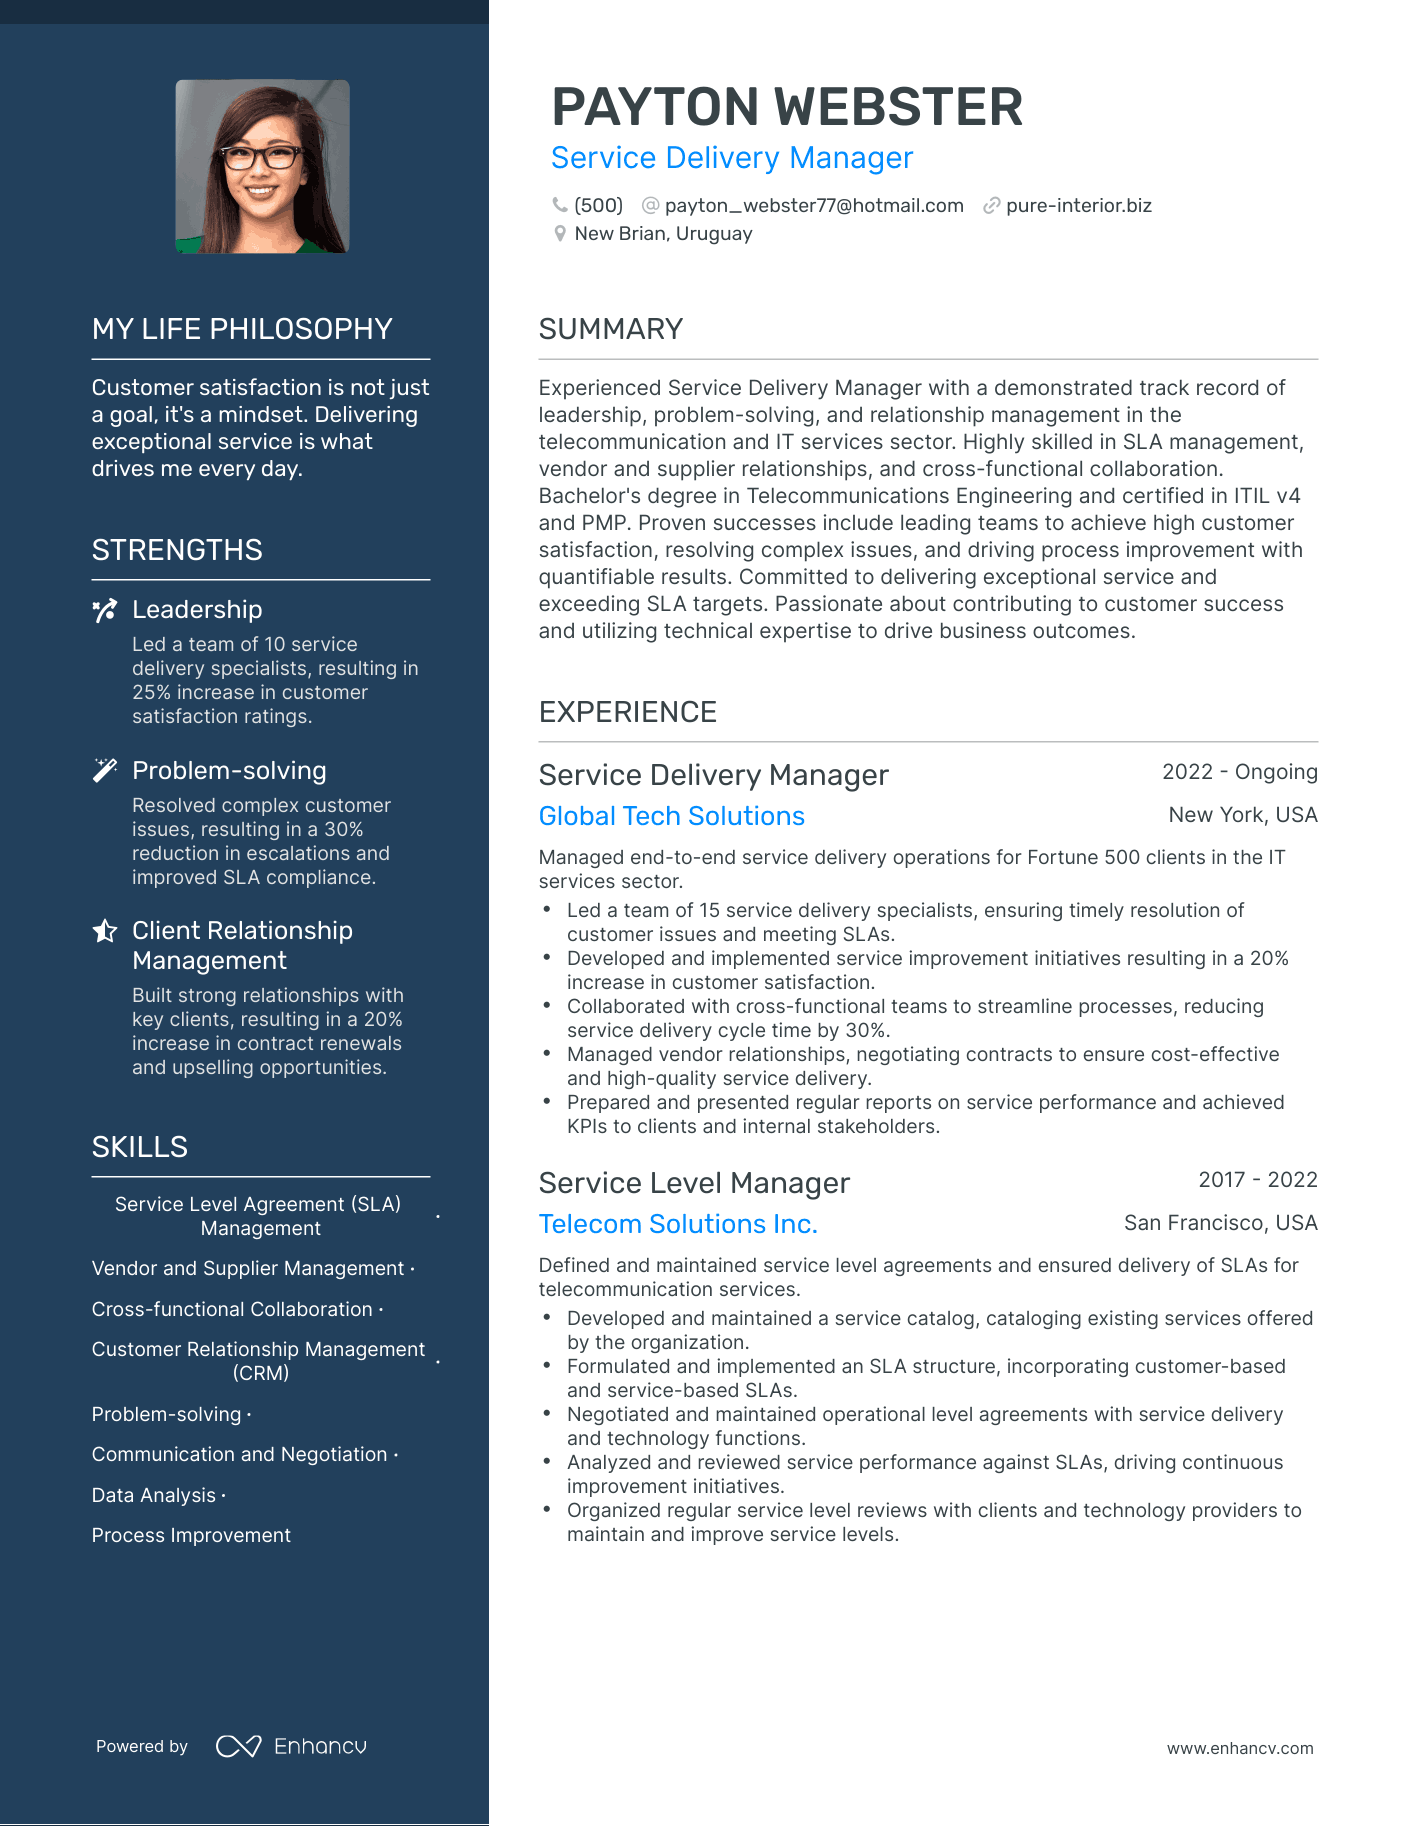 Service Delivery Manager resume example